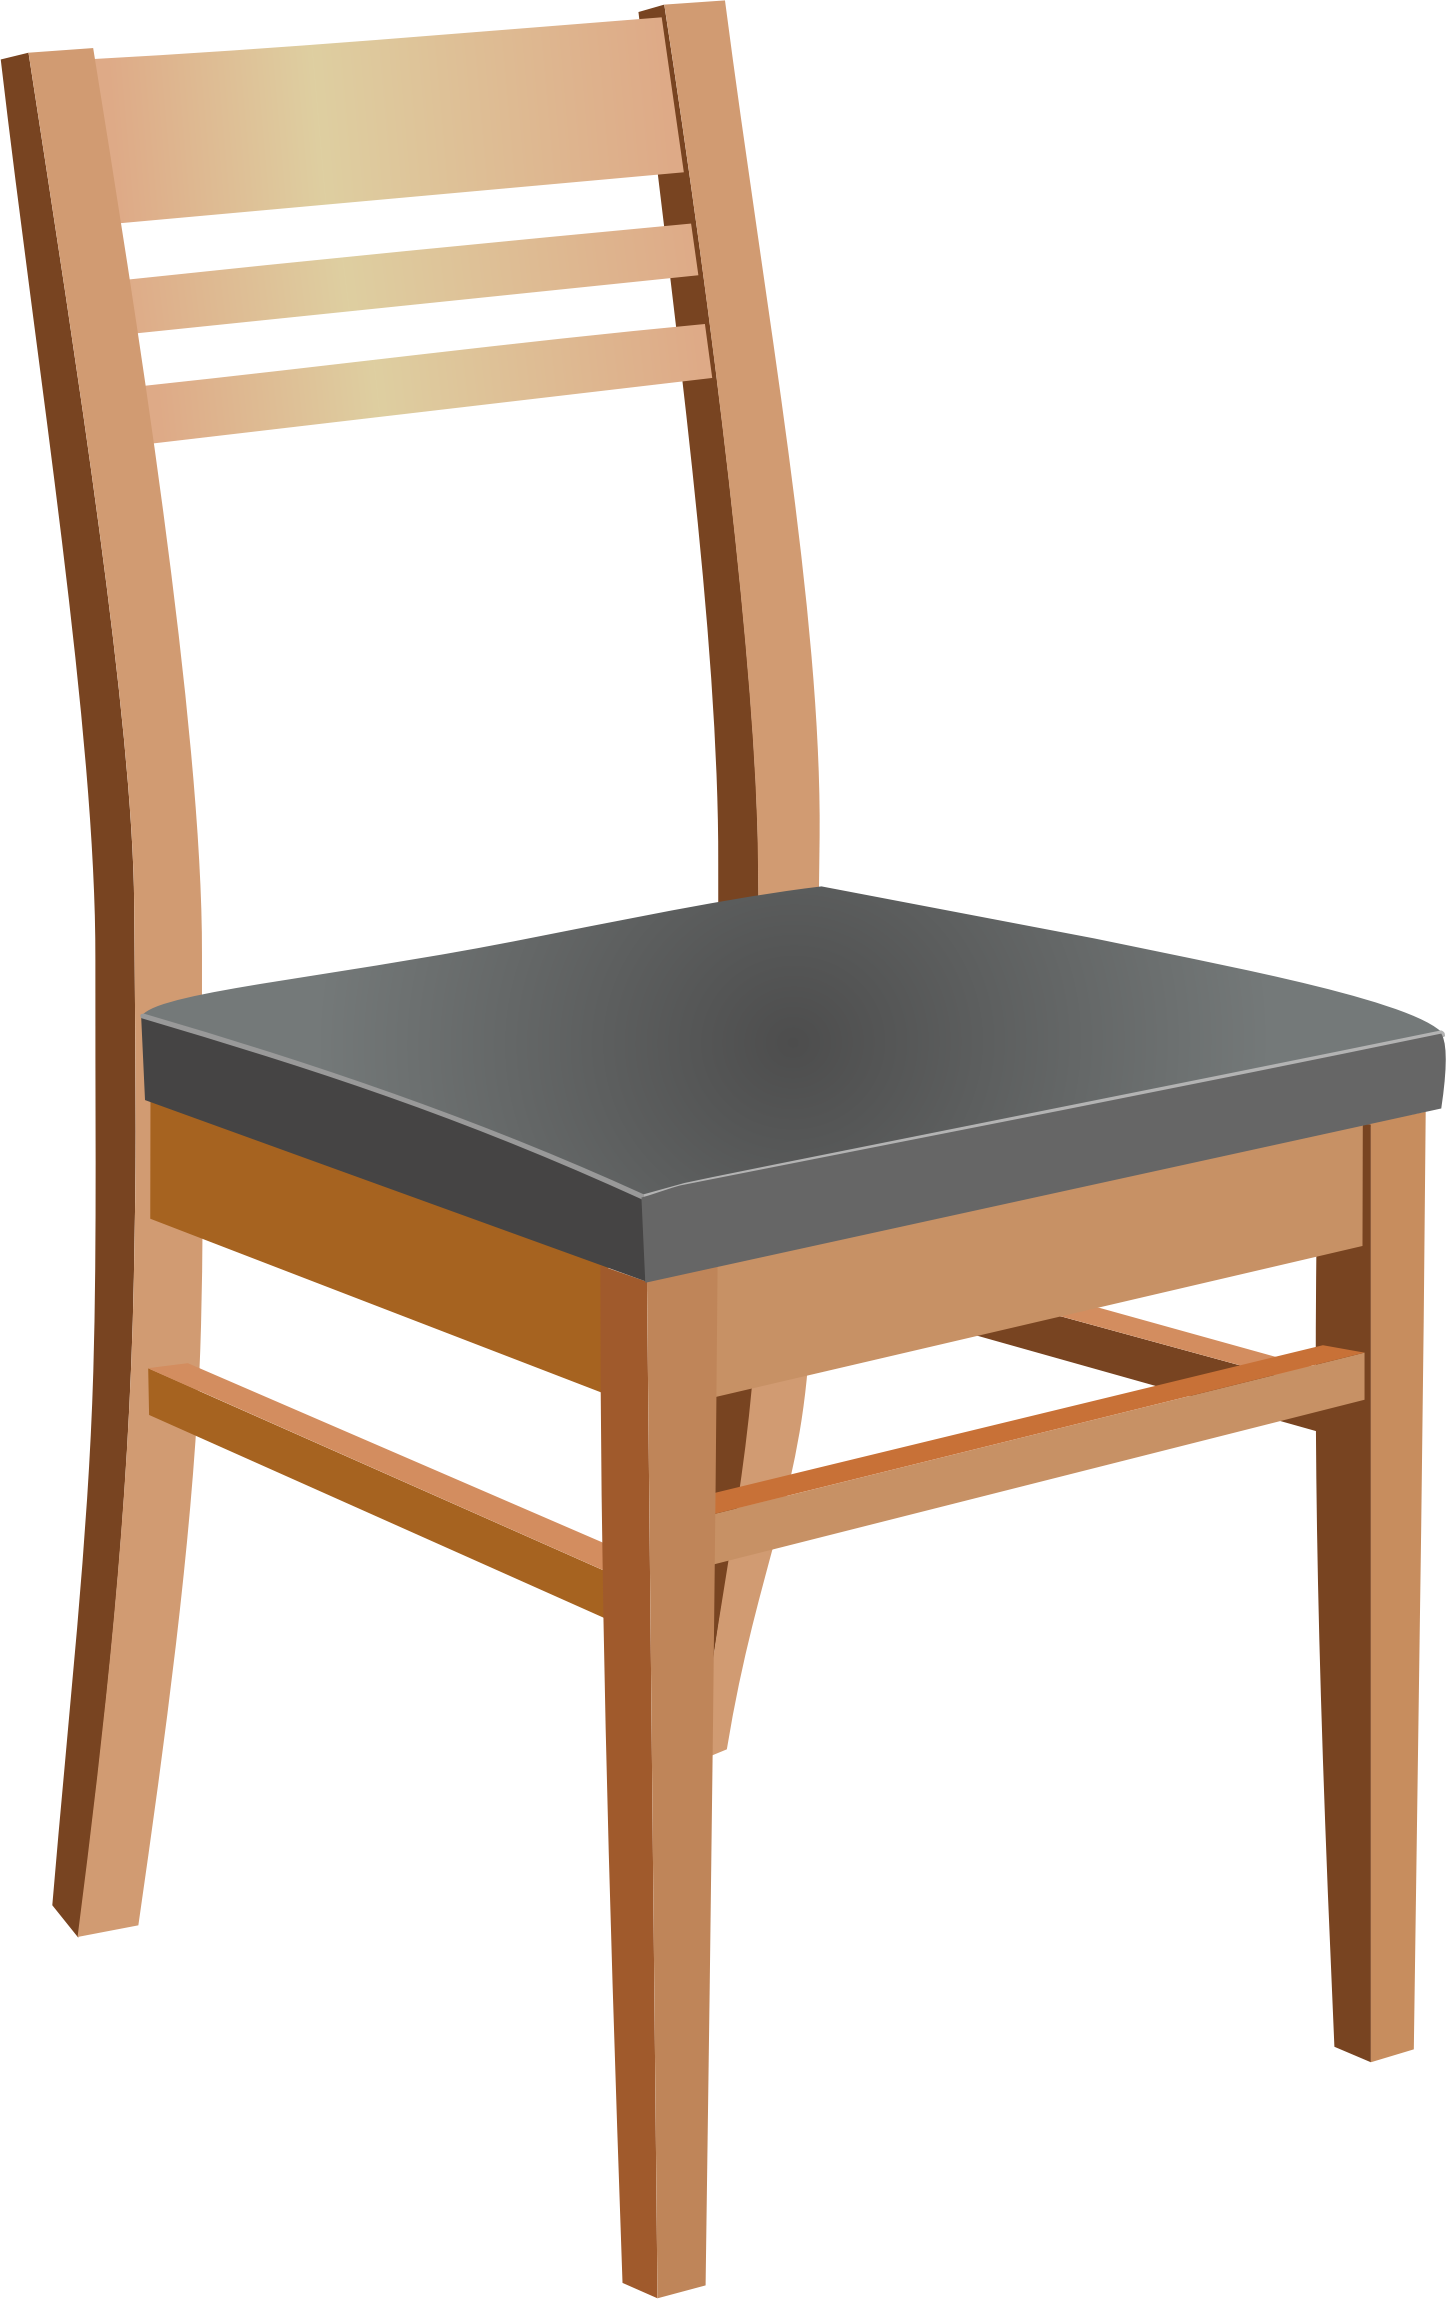 Chair Clipart Black And White - Free Clipart Images